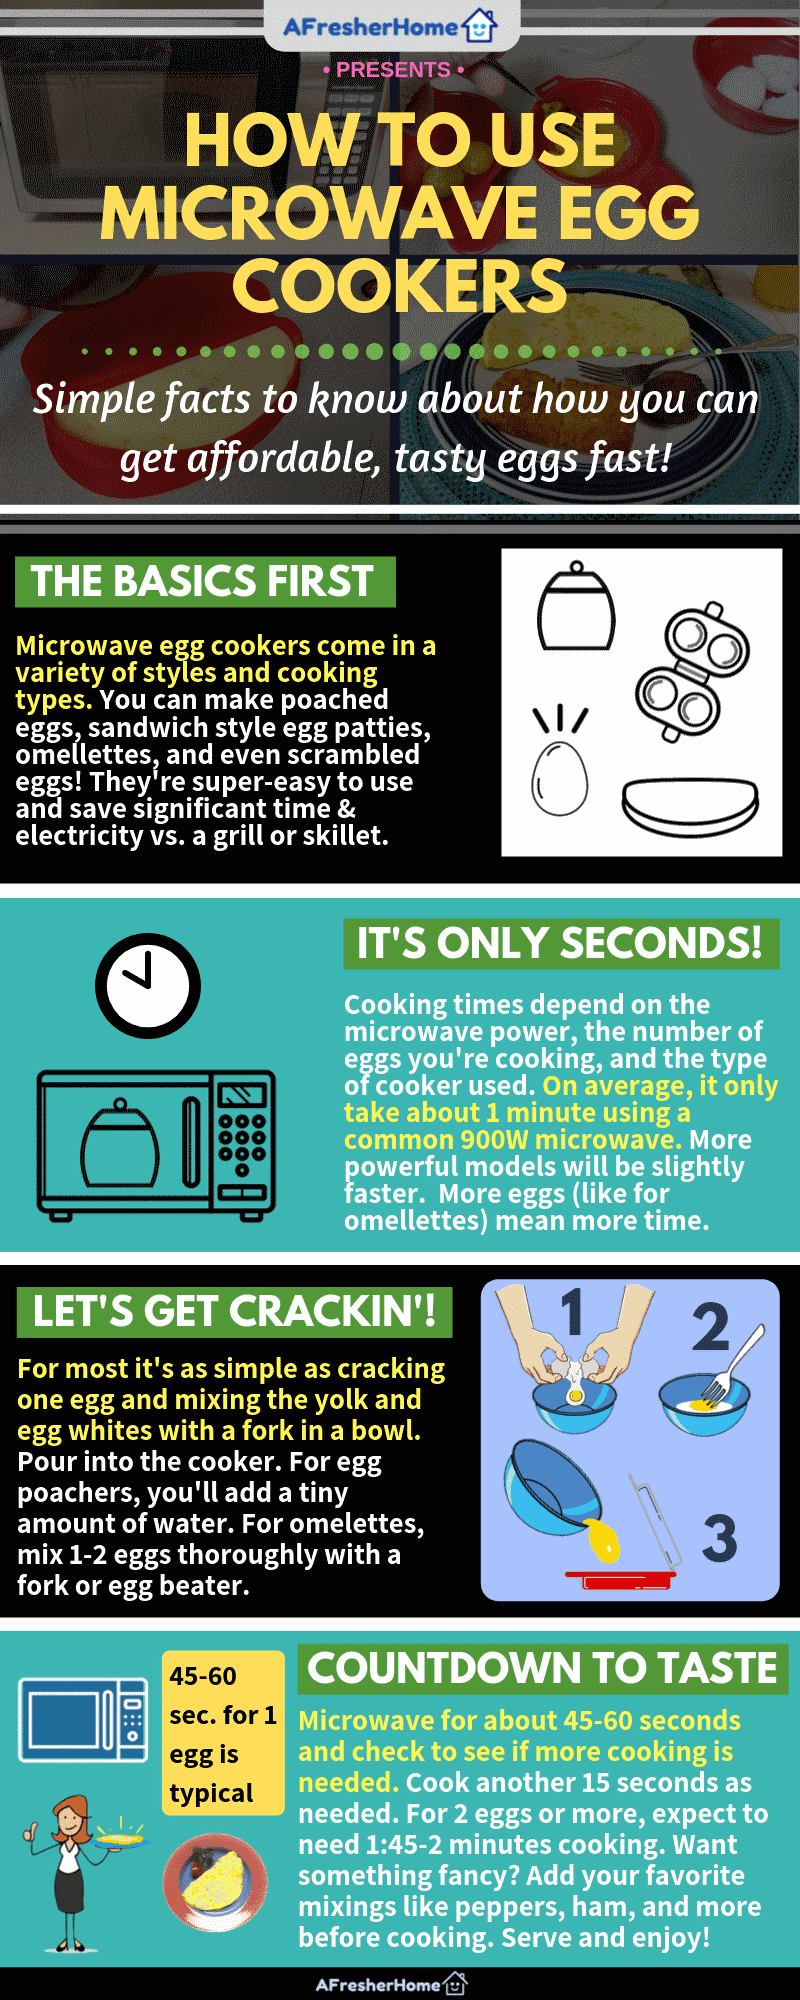 Microwave egg cooker basics infographic guide